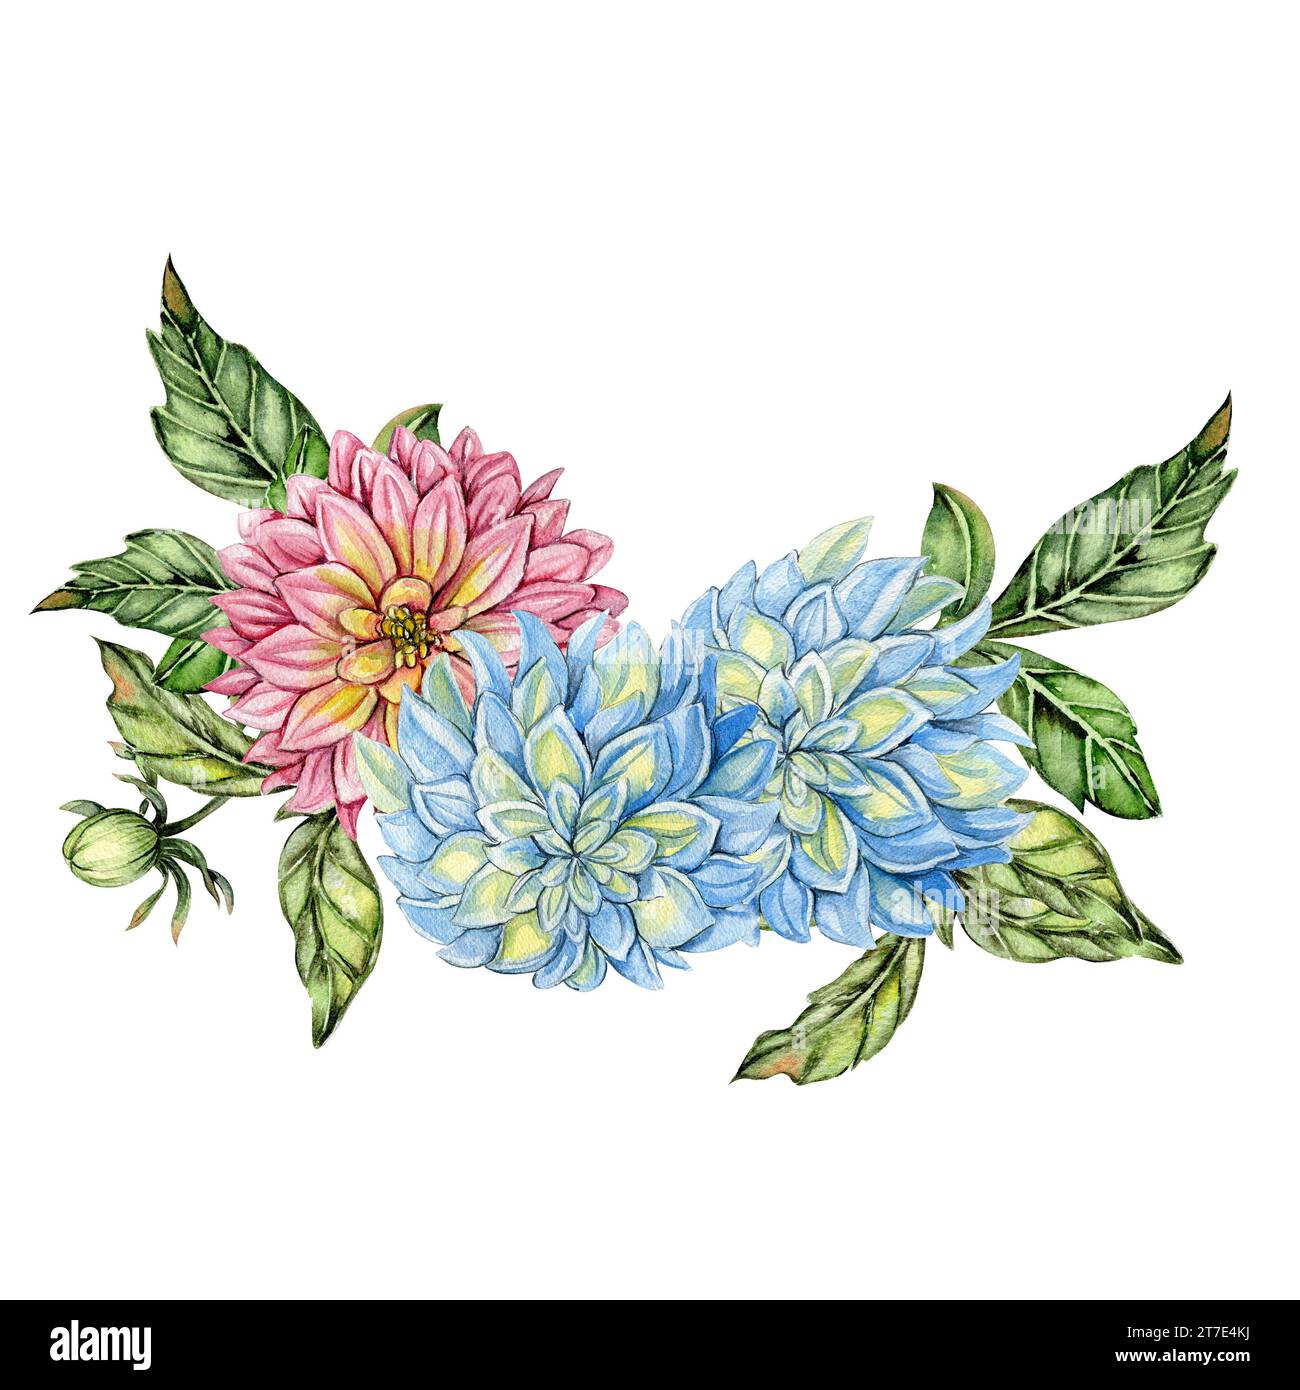 Watercolor dahlia flowers composition. Hand drawn illustration of a blooming flower garden. Design for baby shower party, birthday, cake, holiday cele Stock Photo